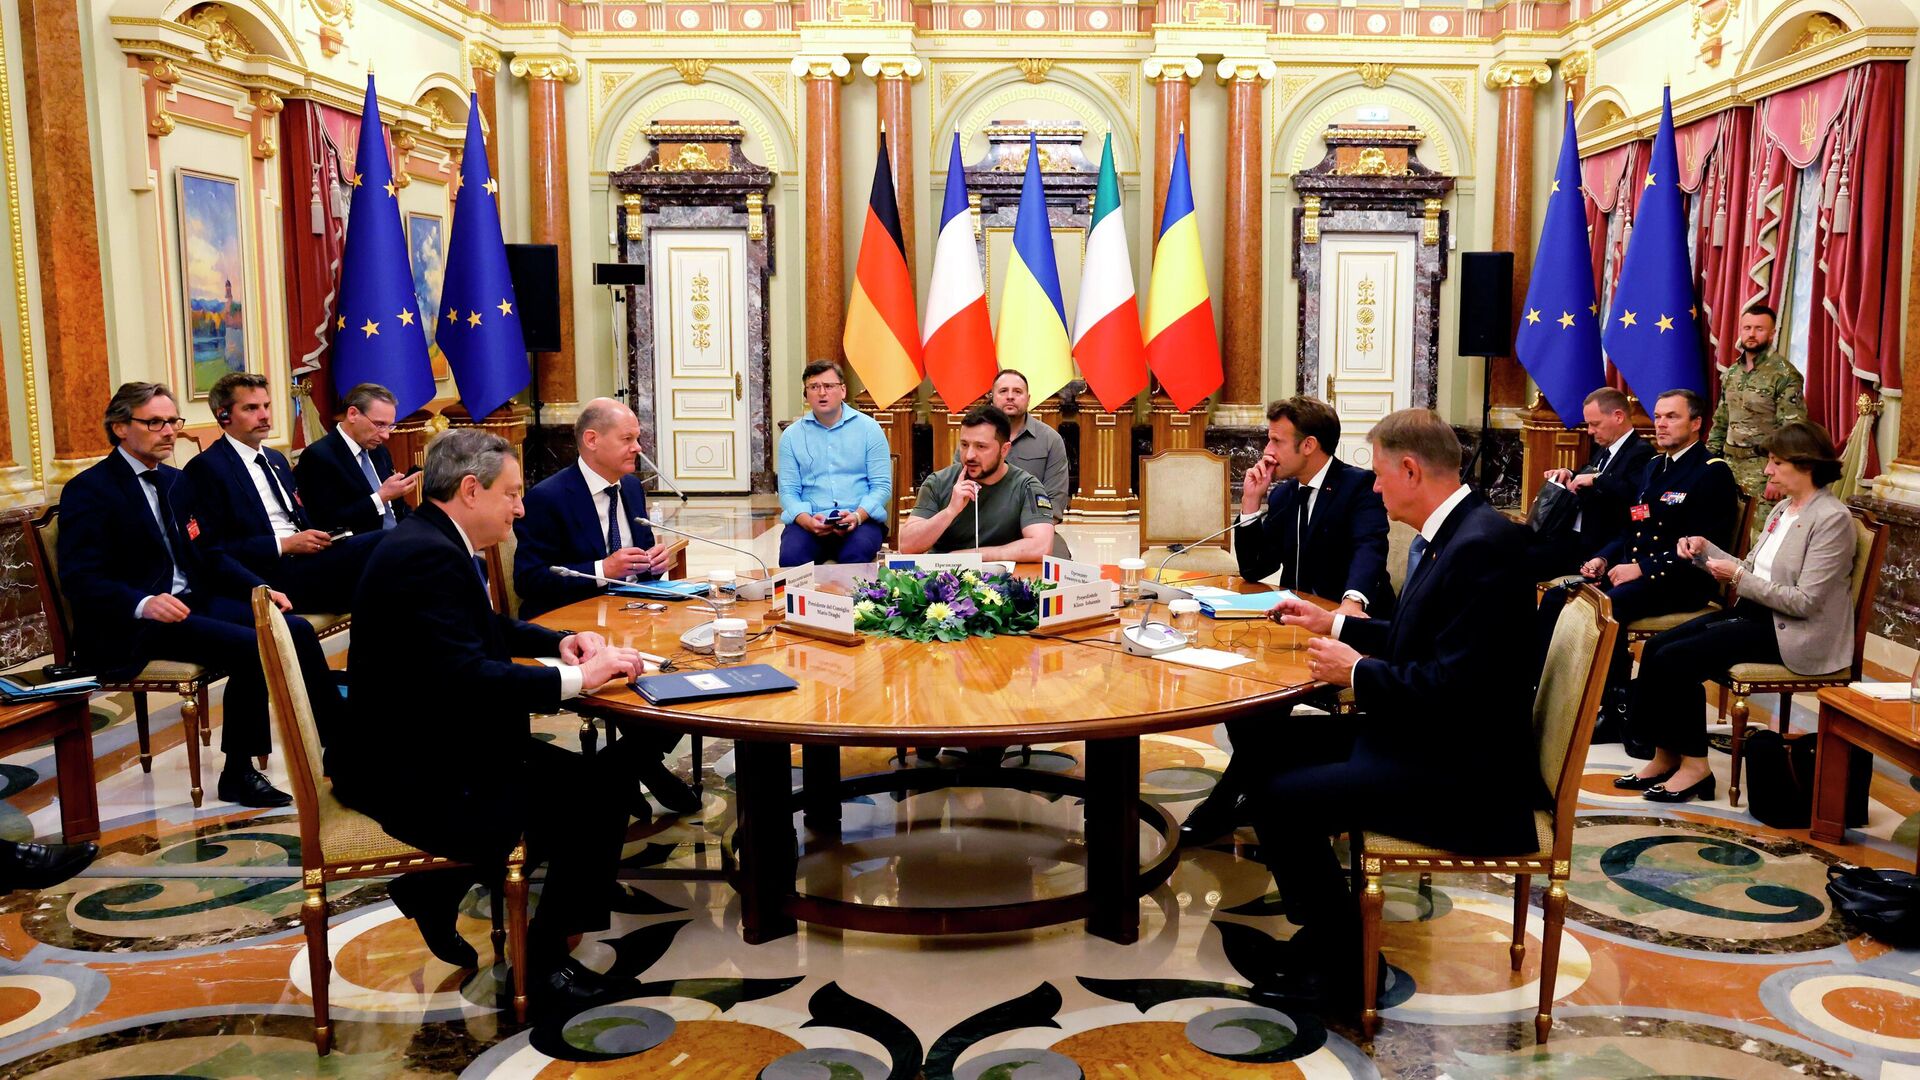 The Italian Prime Minister said that Zelenskiy did not request new weapons  during the meeting. - News Unrolled